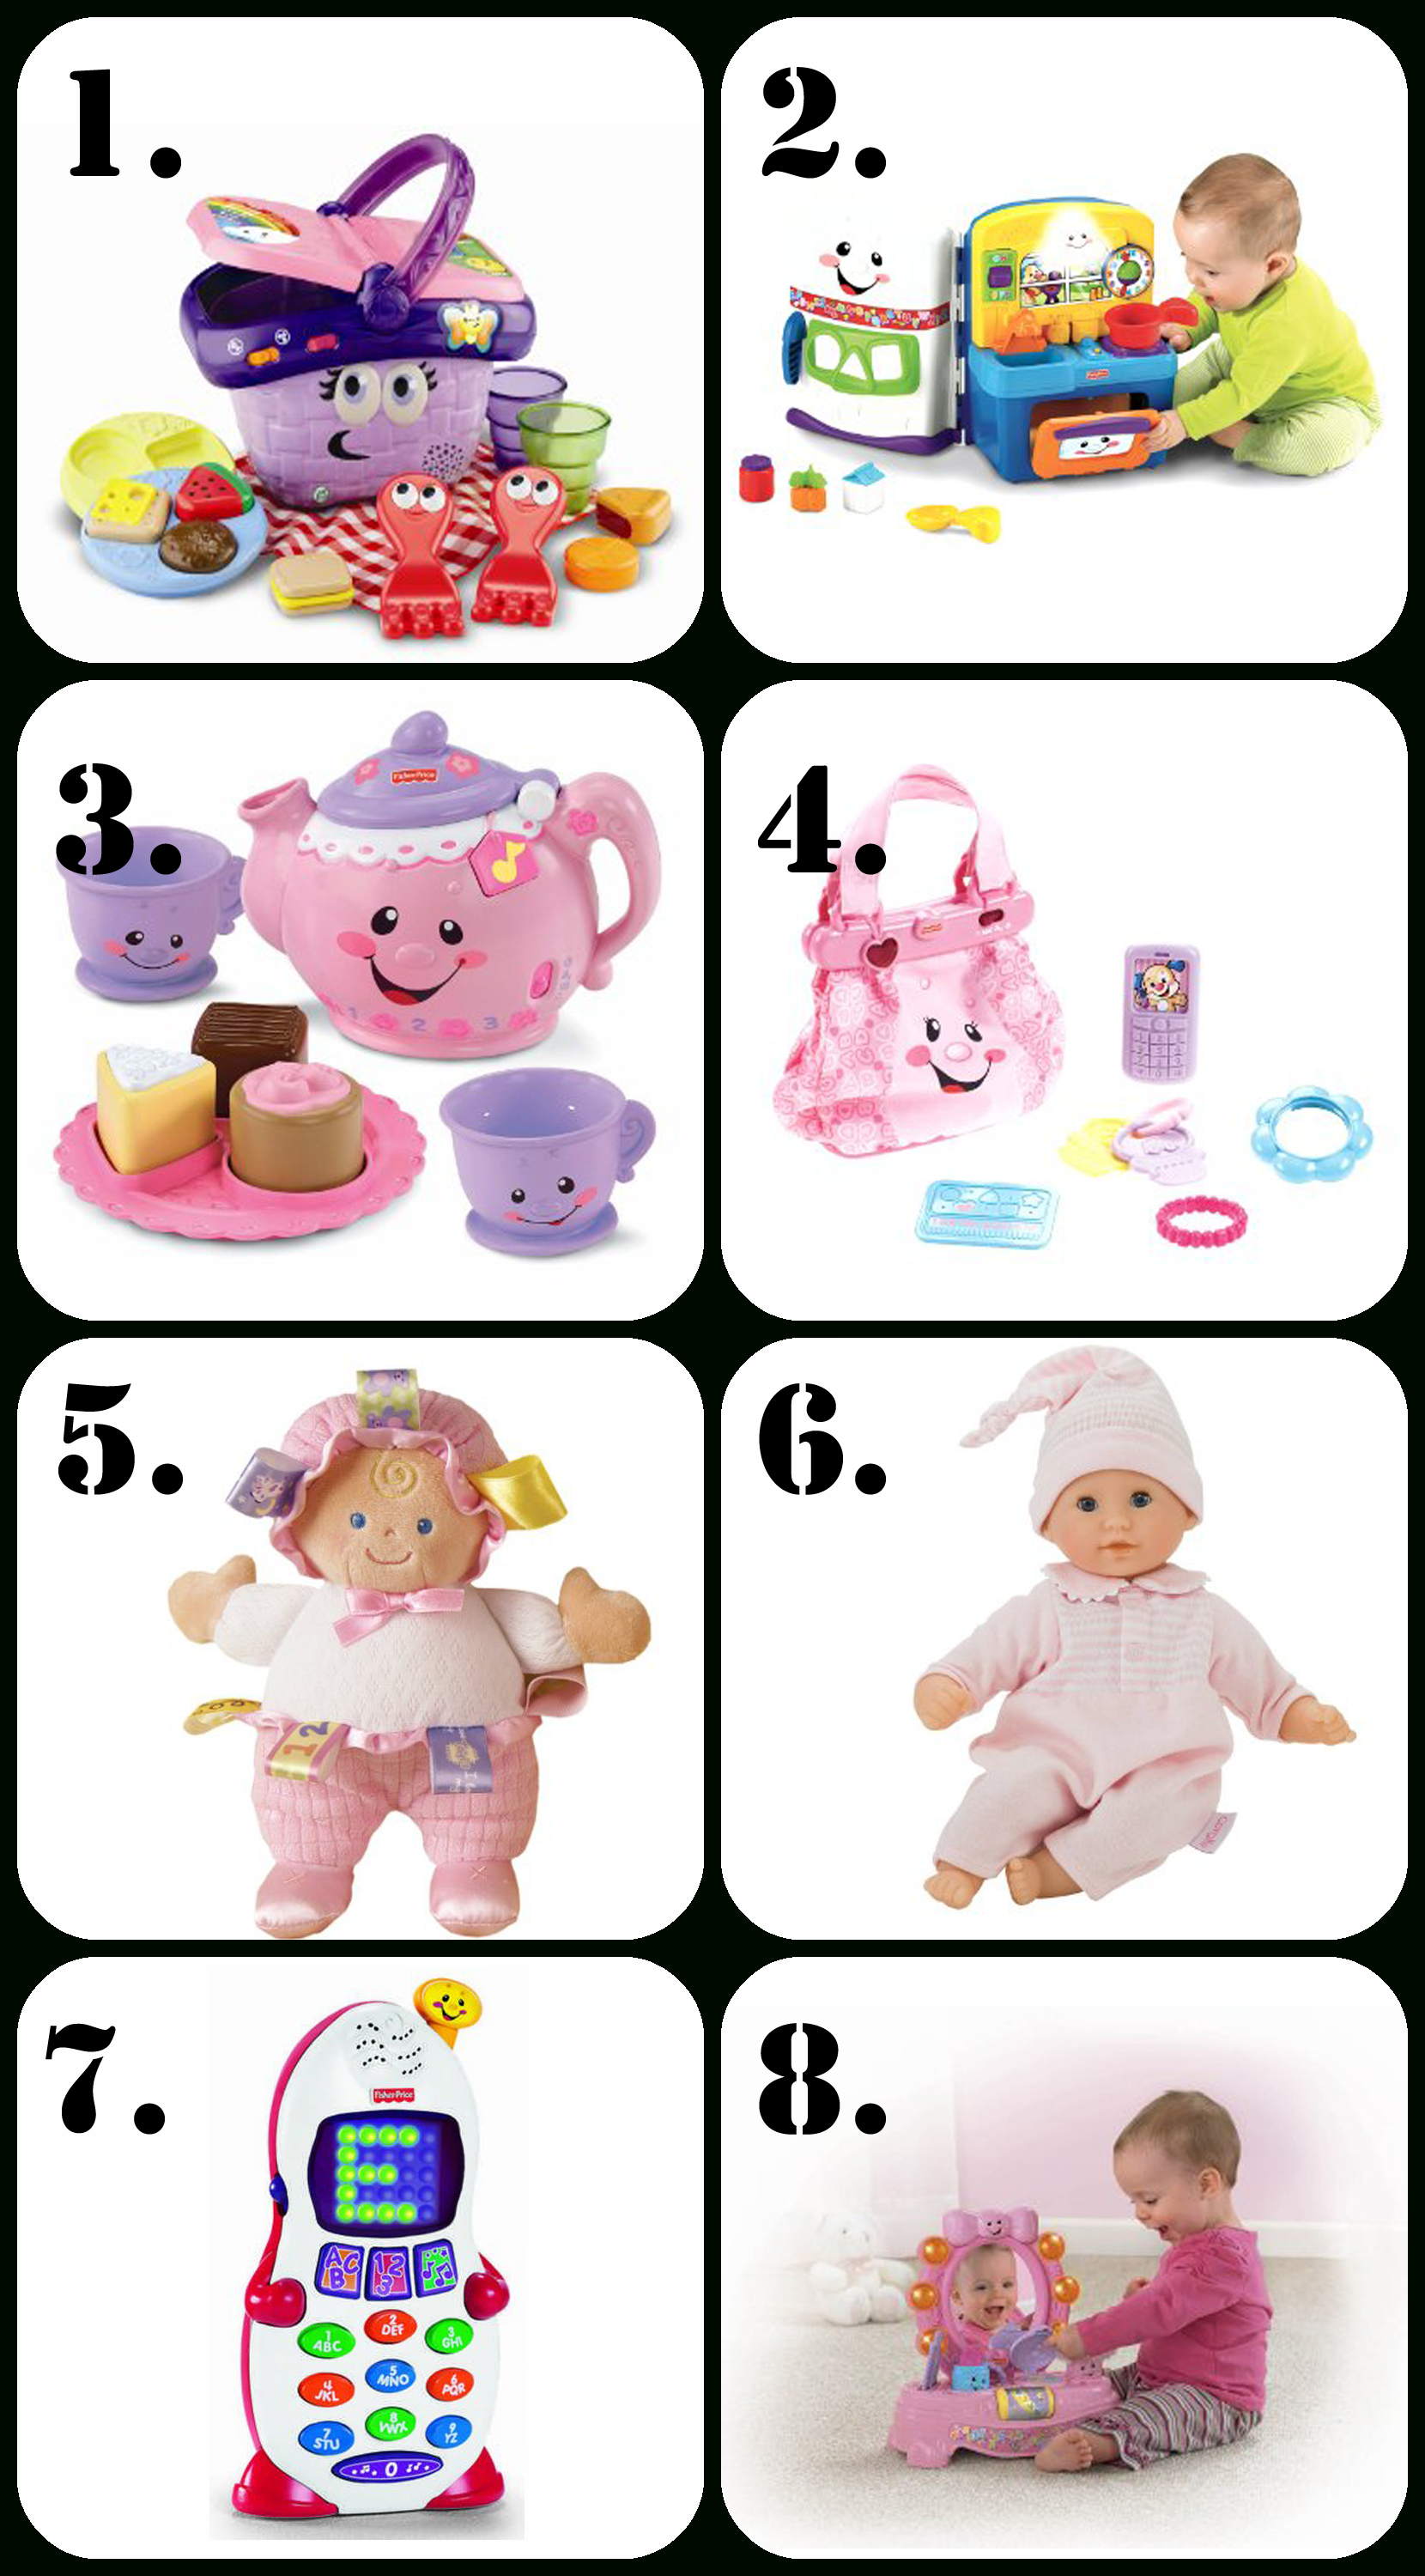 10 Lovable Gift Ideas For A 1 Year Old Girl best gifts for a 1 year old girl e280a2 the pinning mama 2 2022